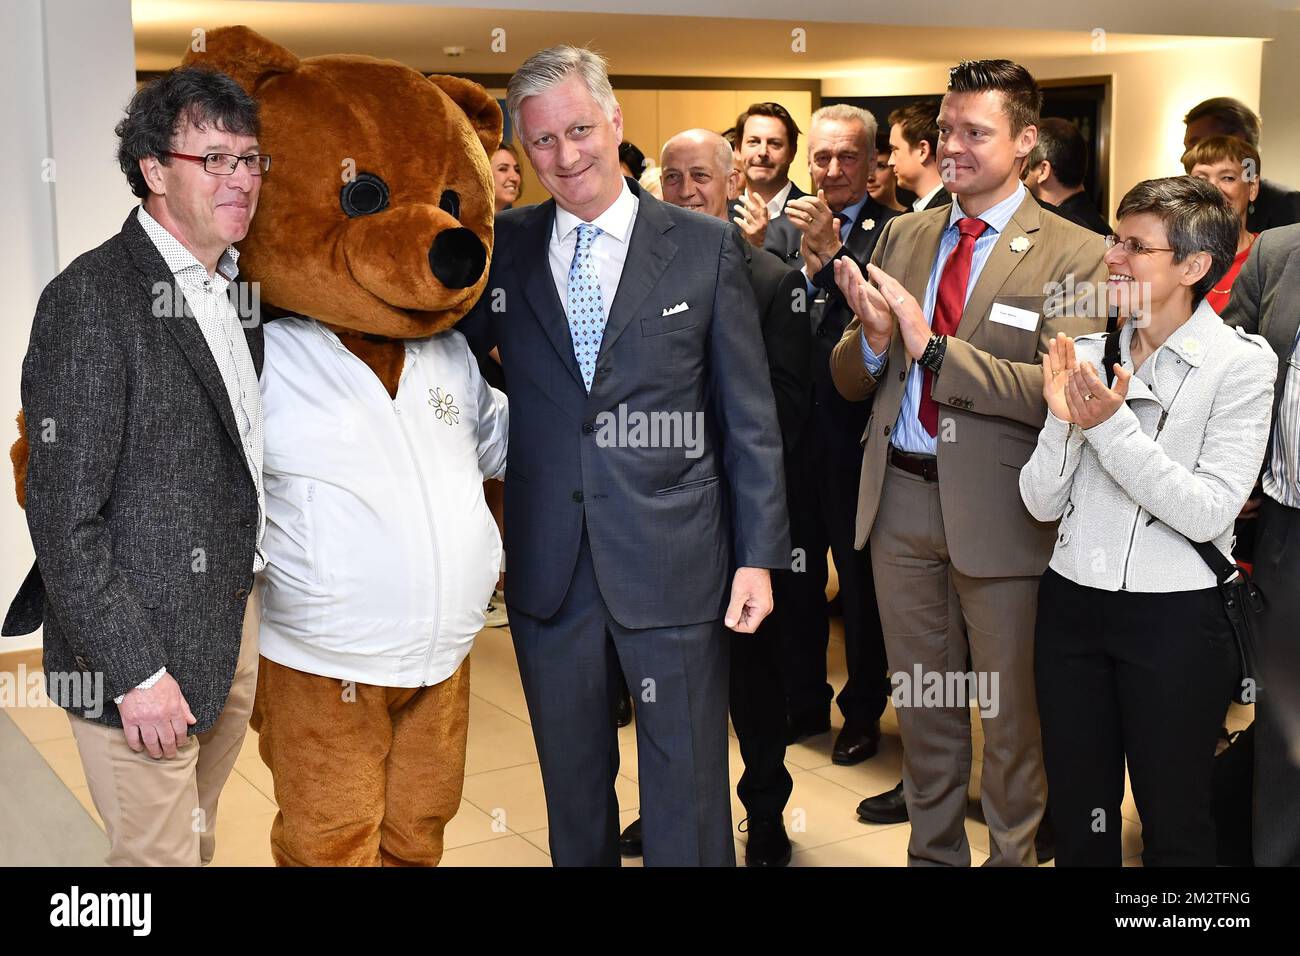 Marc Michils, General Manager Kom op tegen kanker and King Philippe - Filip  of Belgium pictured during a royal visit to the Universitair Ziekenhuis  Antwerpen (UZA) hospital in Edegem, Friday 03 May